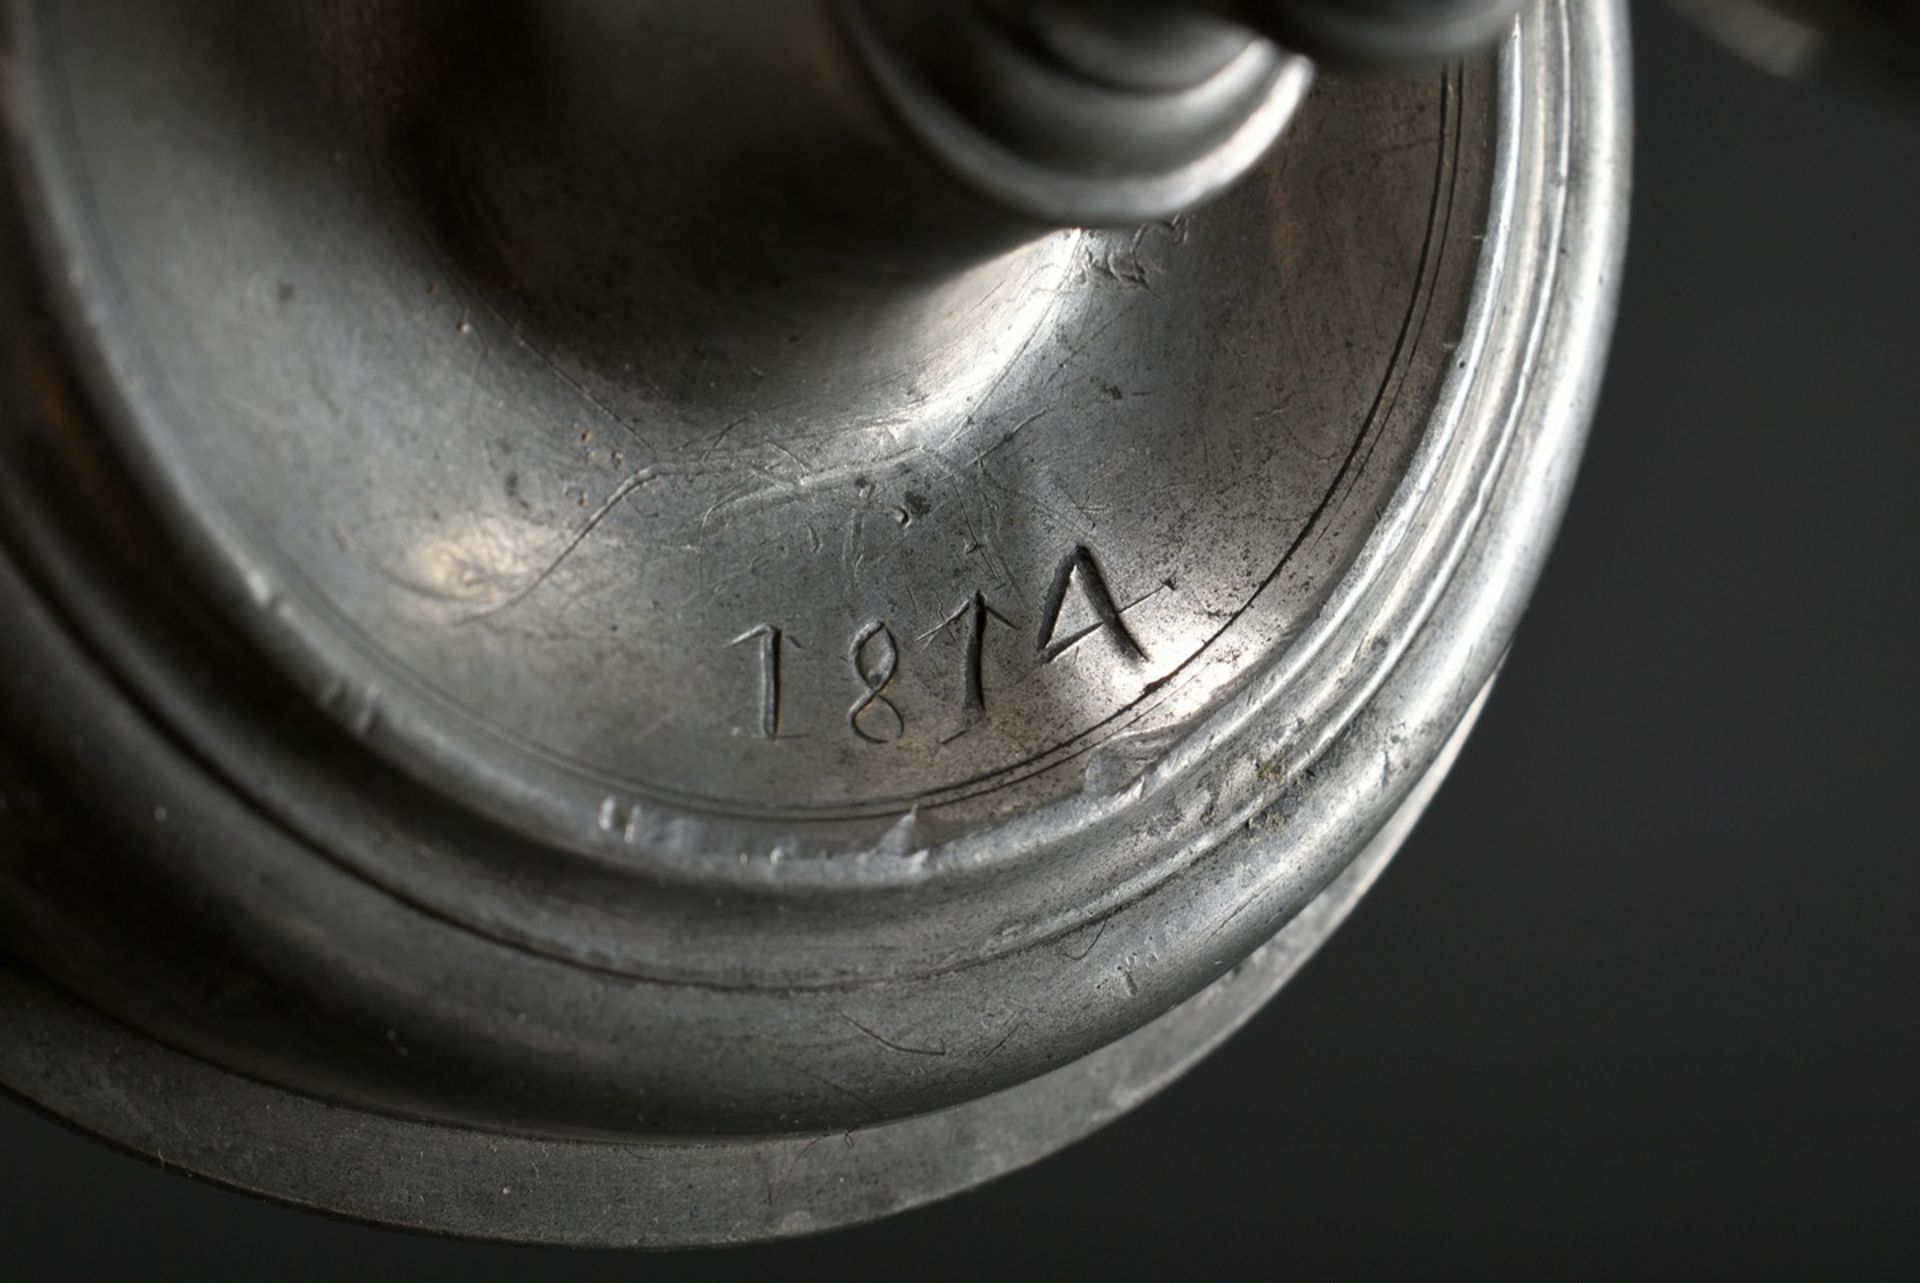 3 Various pieces of pewter, 18th century: large plate with engraved owner's monogram "C.S.S. 1775", - Image 6 of 11